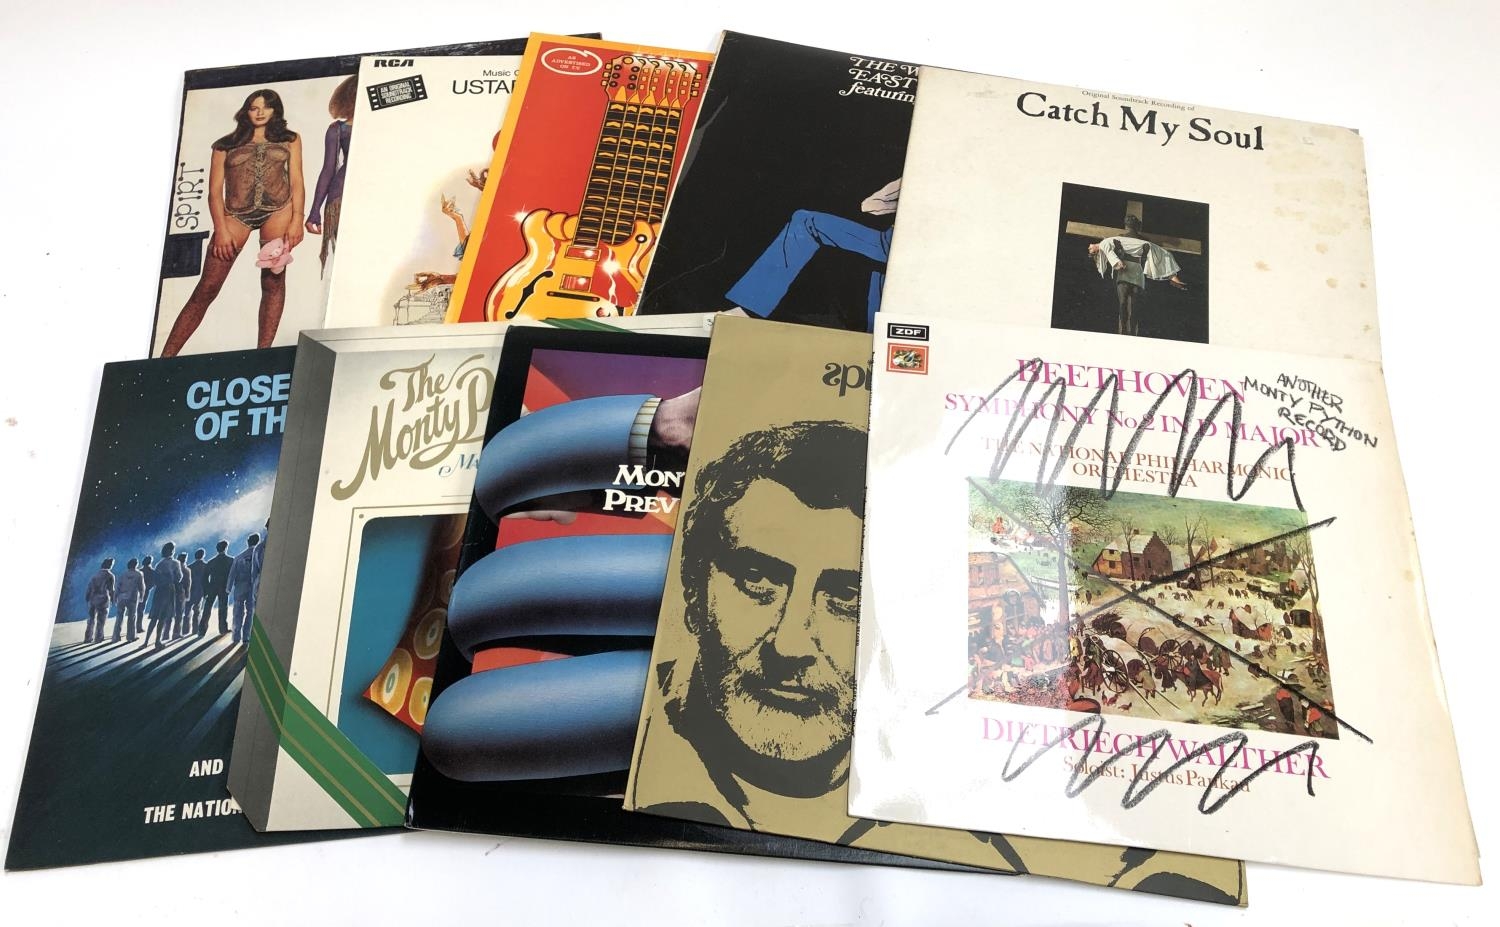 VINYL LPS: MISCELLANEOUS. To include comedy (Monty Python, Spike Milligan). FIlm Music and others.